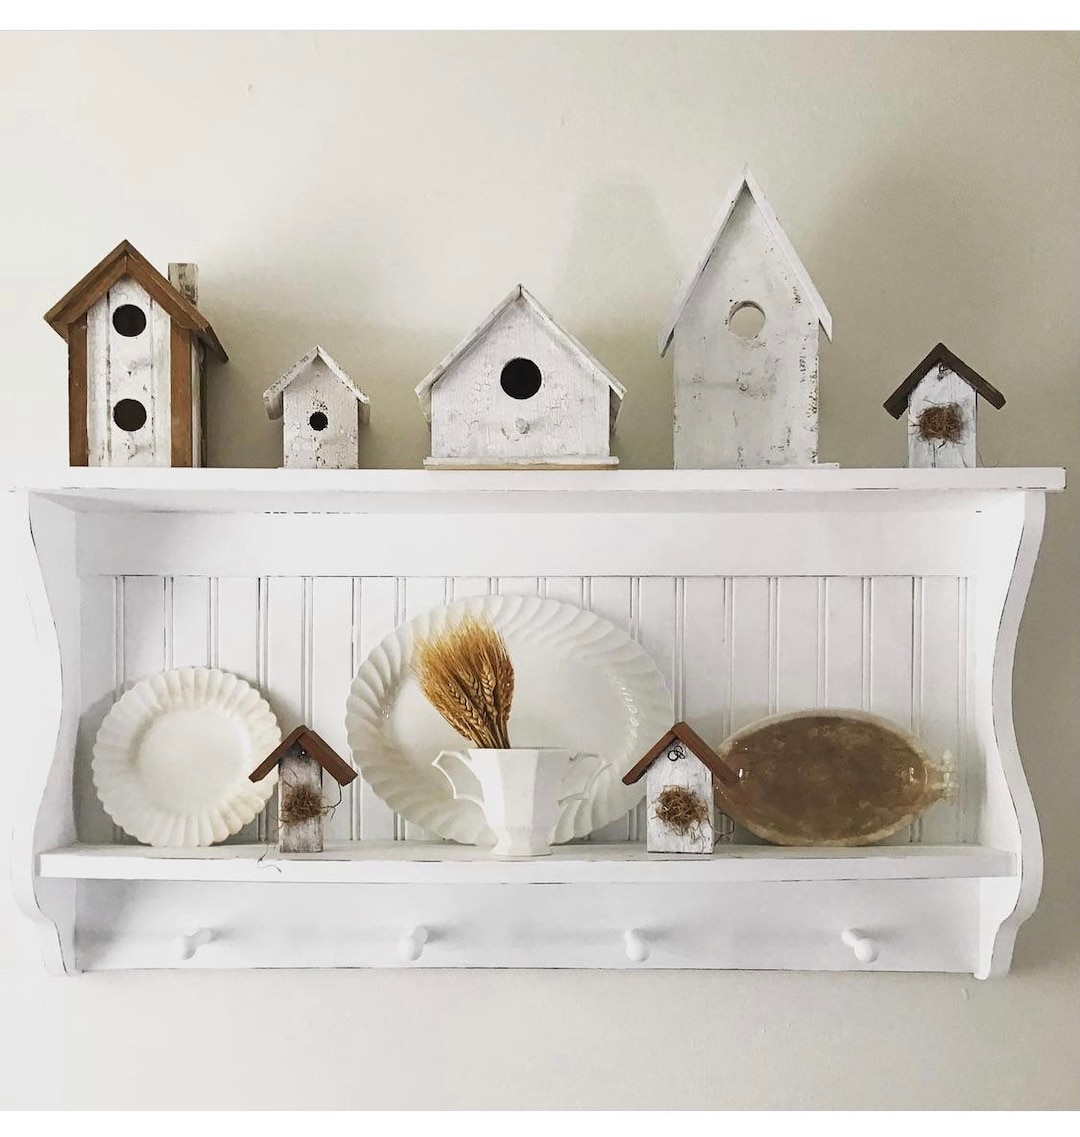 Country shaker peg drying Wood plate dish rack cabinet shelf kitchen Holds  plates unfinished solid 3/4 pine wood